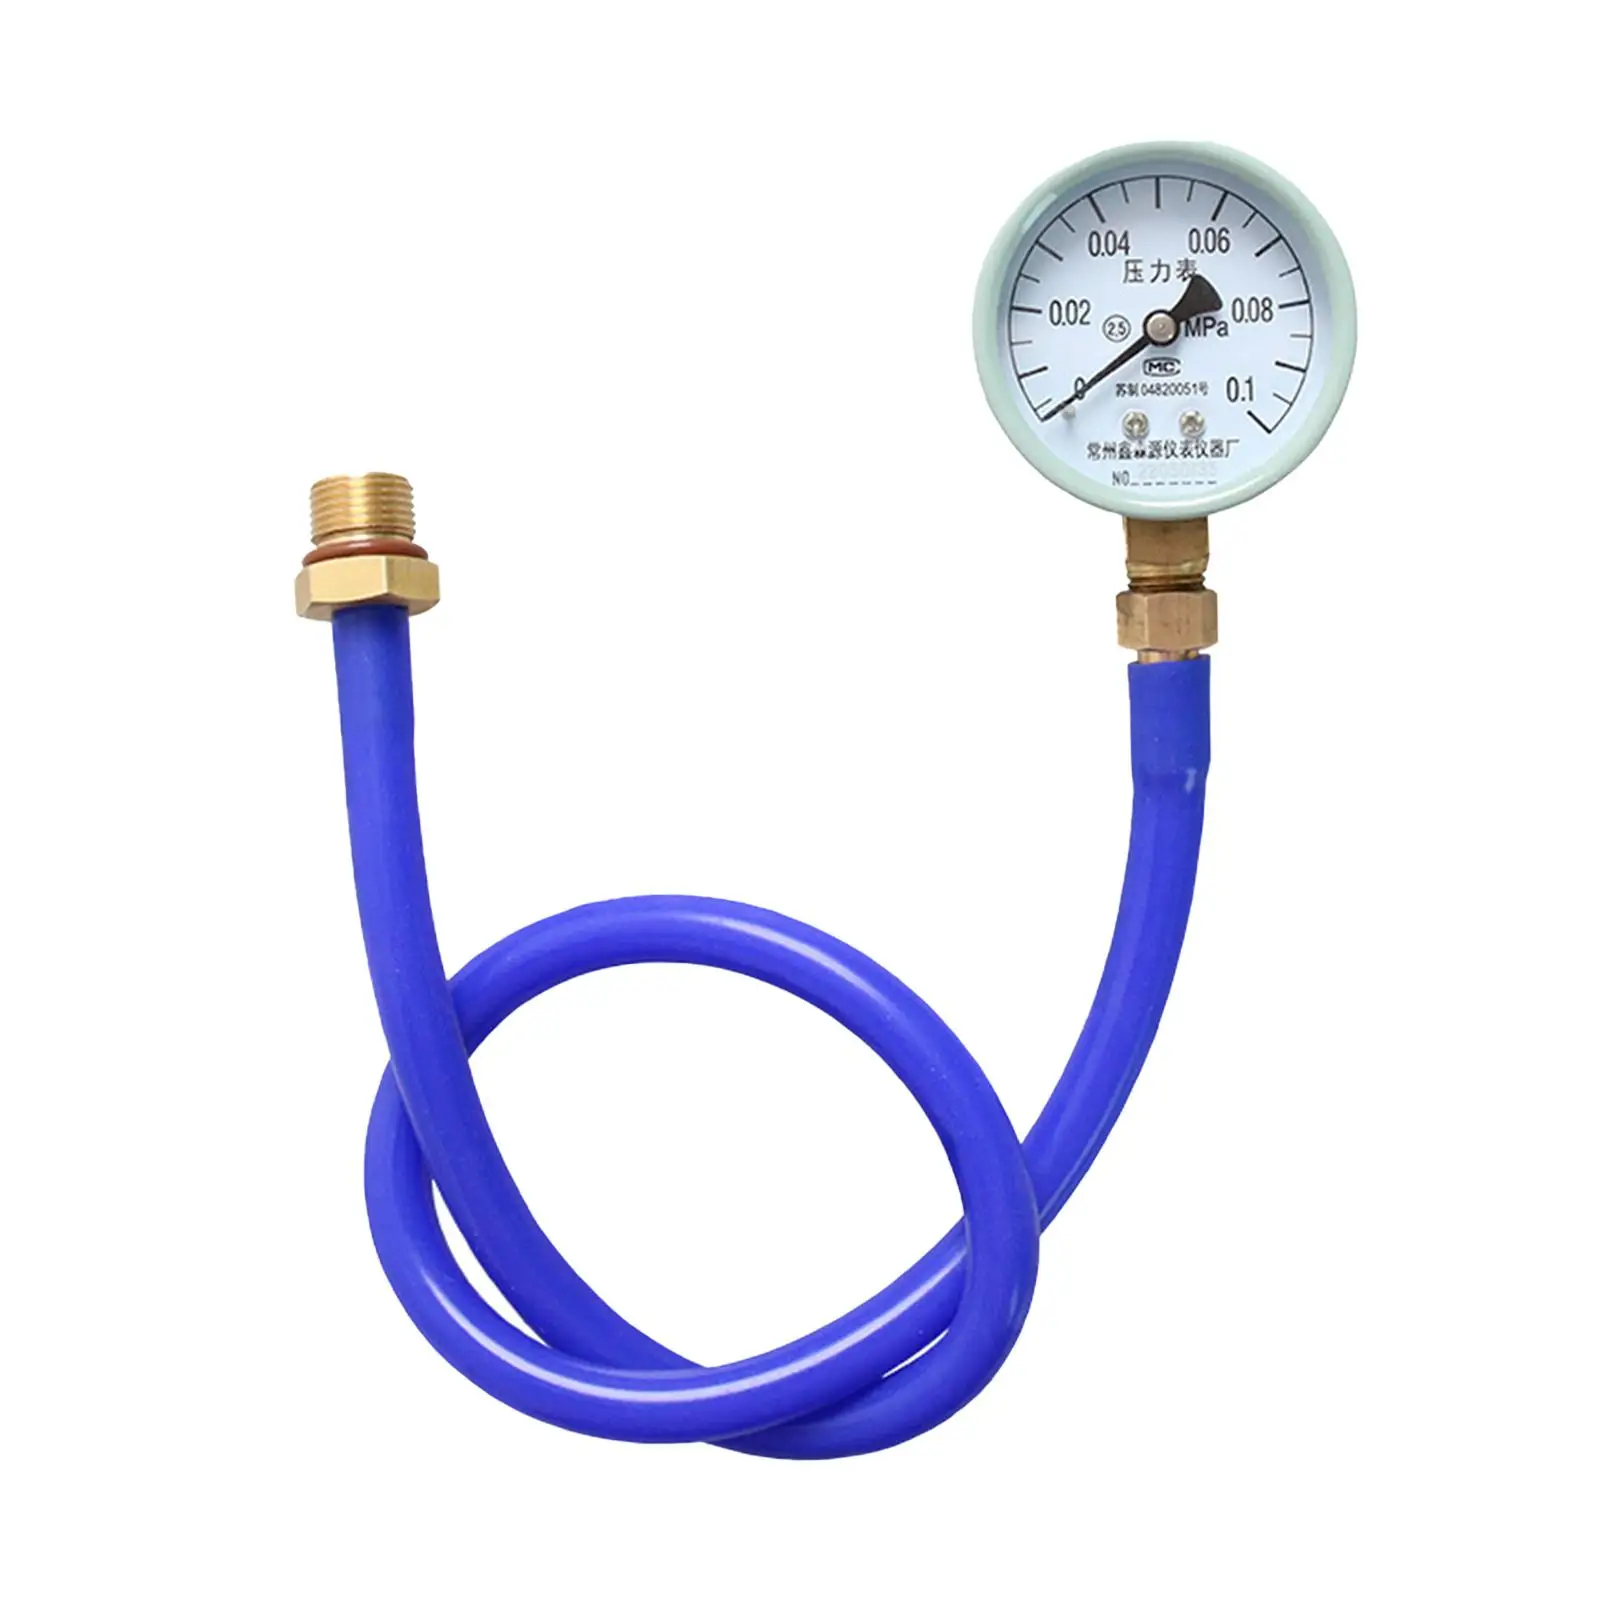 Exhaust Back Pressure Tester Car Repairs Tool Professional Pressure Gauge Universal for Automobile Vehicles Automotive Car